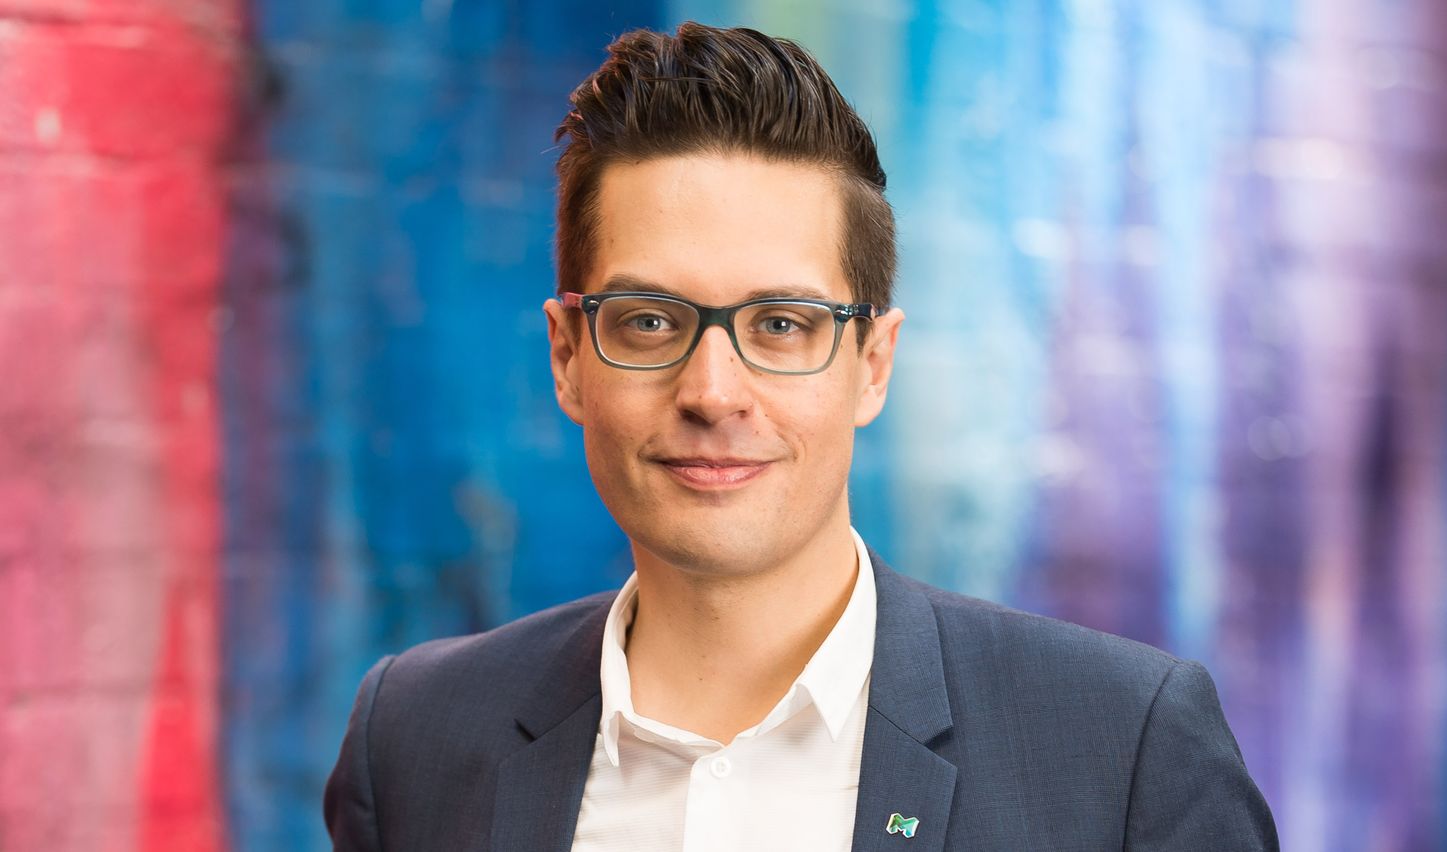 Greens councillor Rohan Leppert runs to become Melbourne’s first openly gay mayor